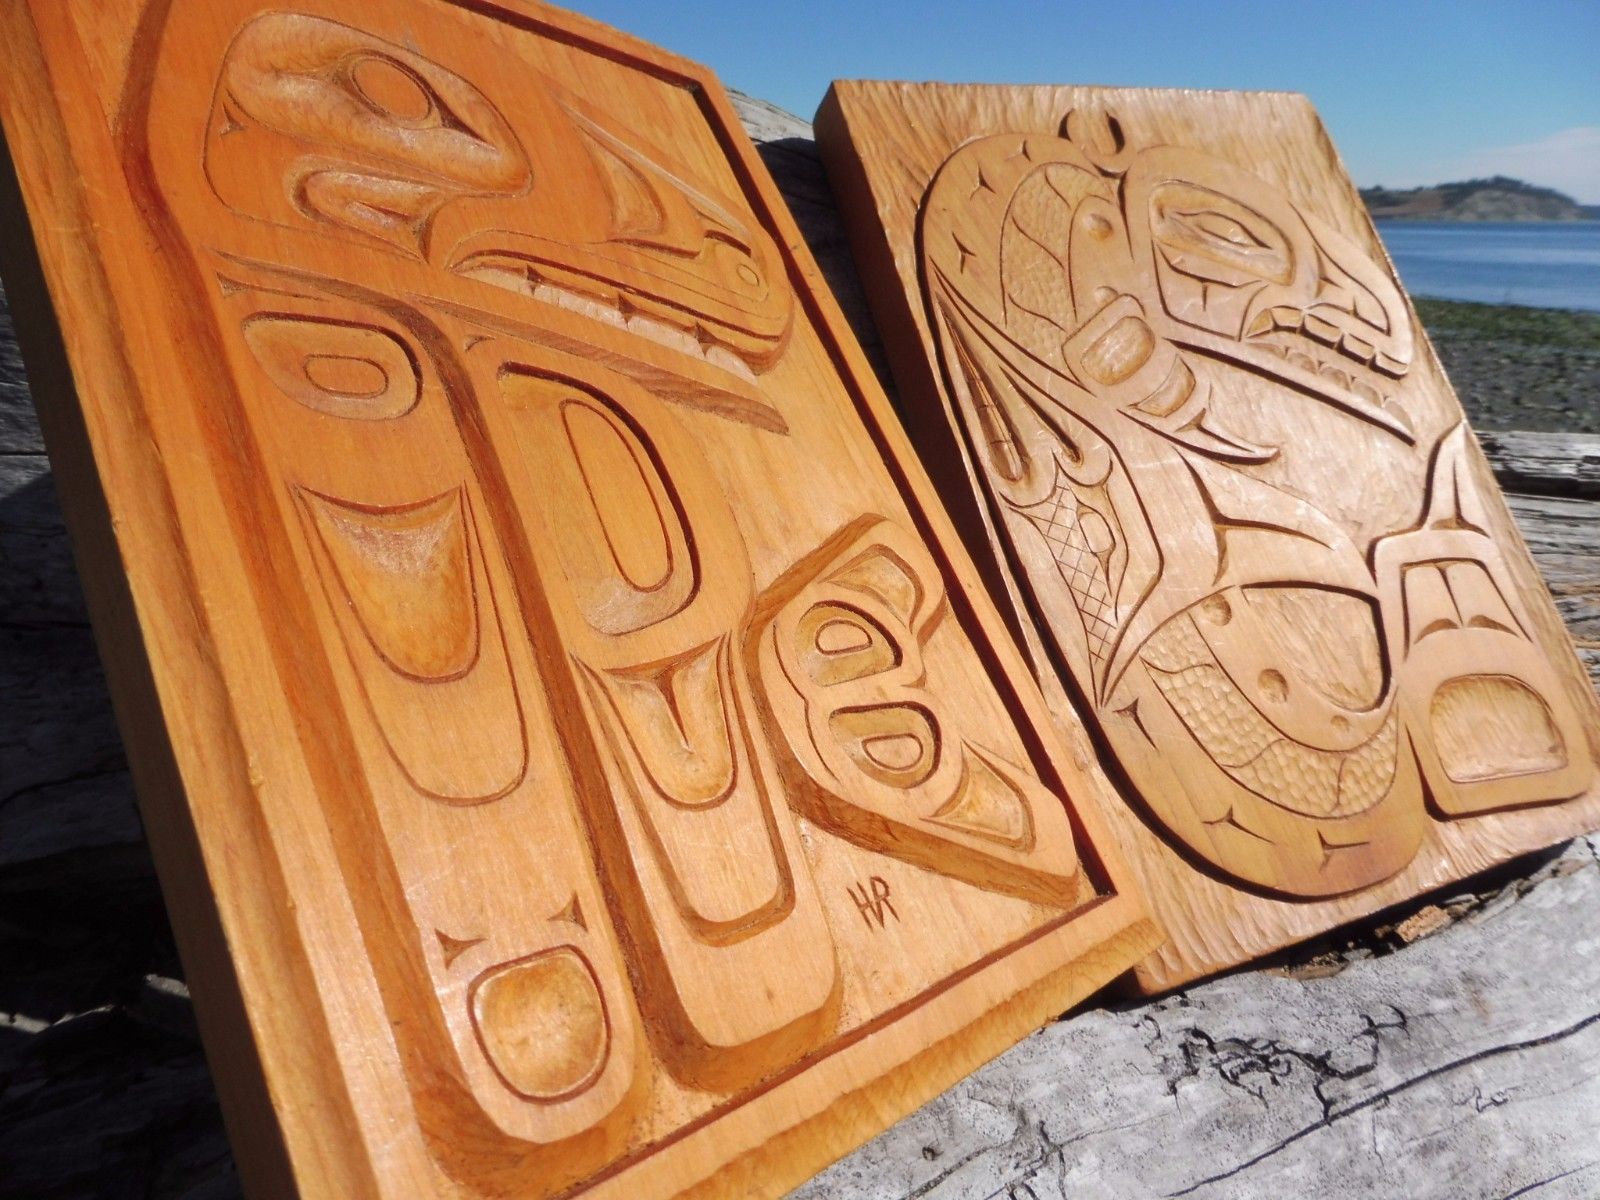 Northwest Coast First Nations native PAIR of wooden Art carvings: Whale's